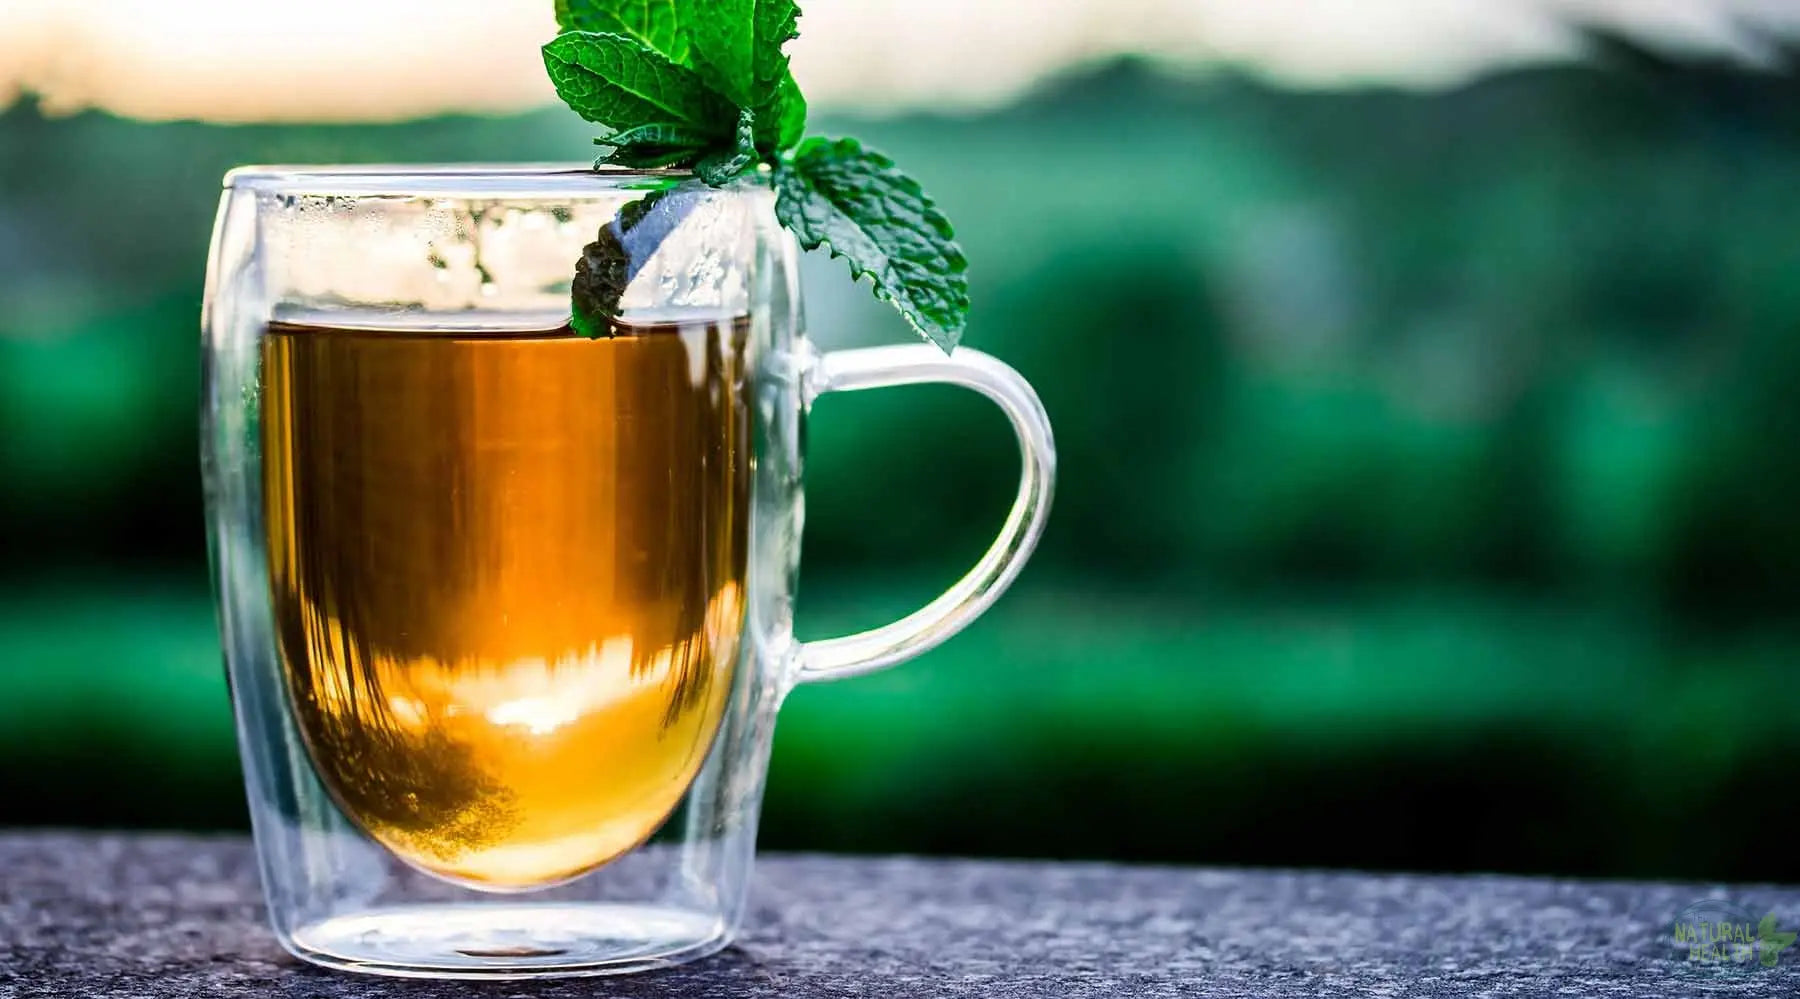 Time To Revive? Let Loose With A Cup Of Peppermint Tea - The Natural Health Market